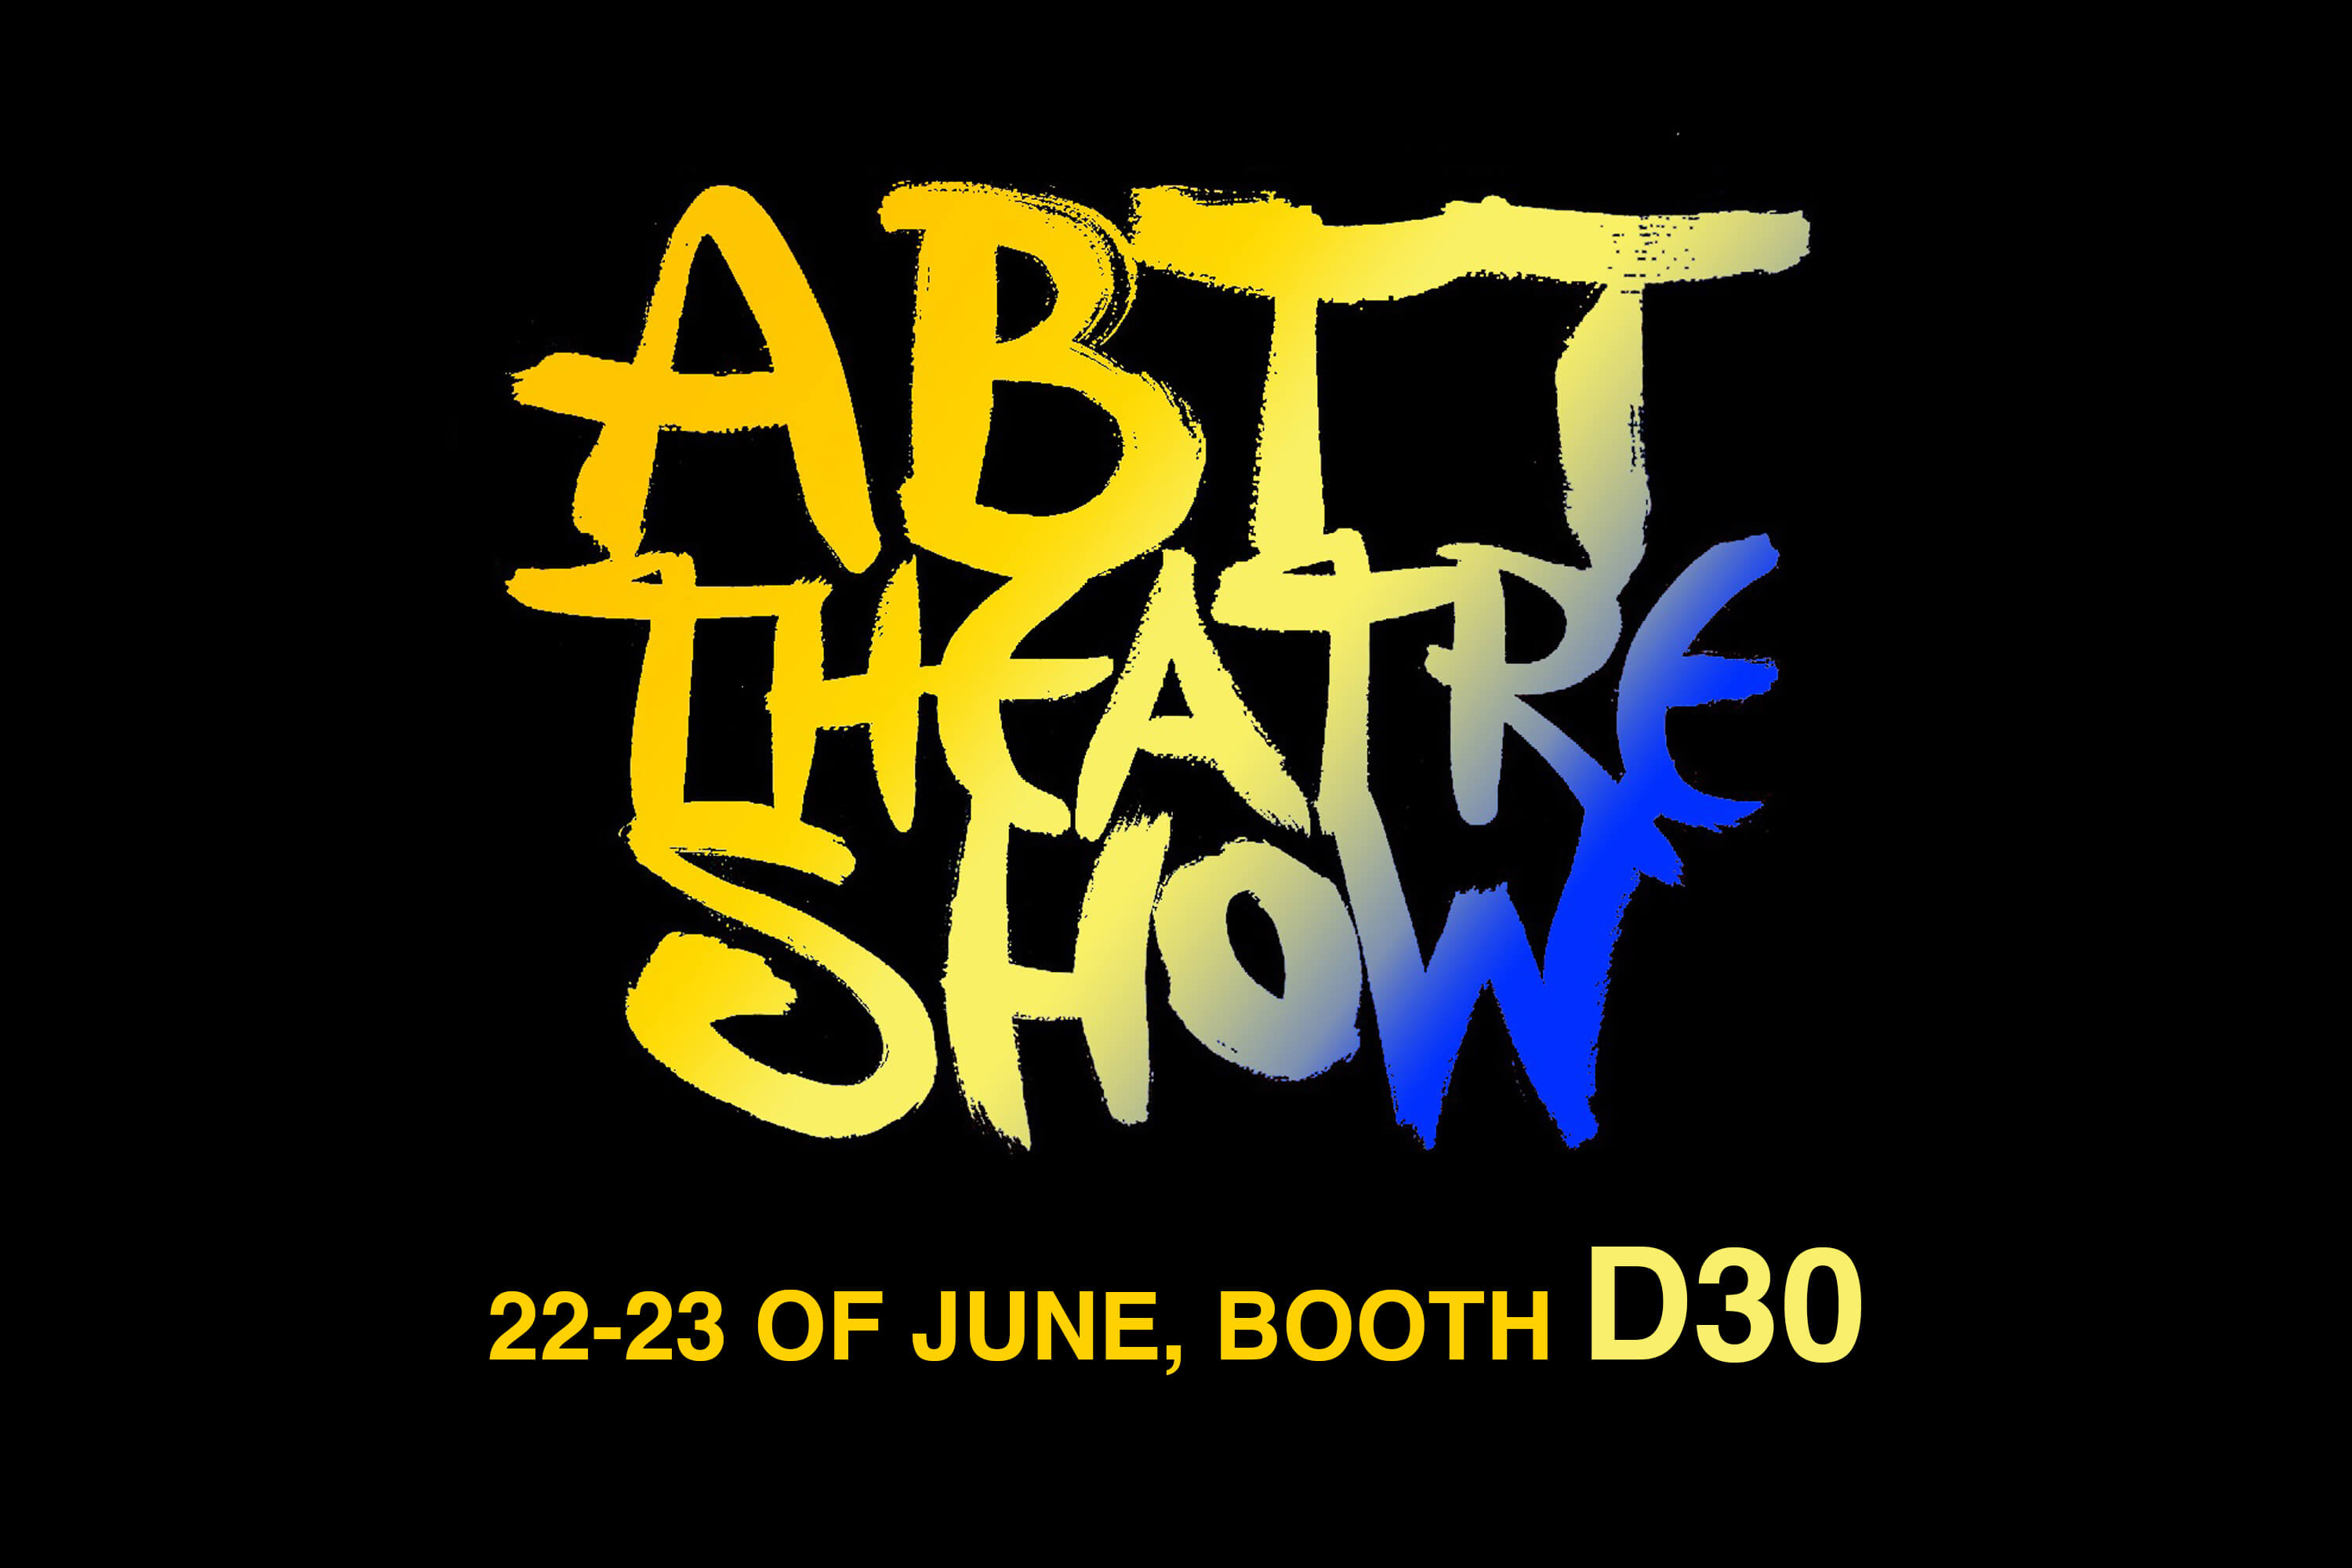 Visit us at this year's ABTT Theater Show, London!